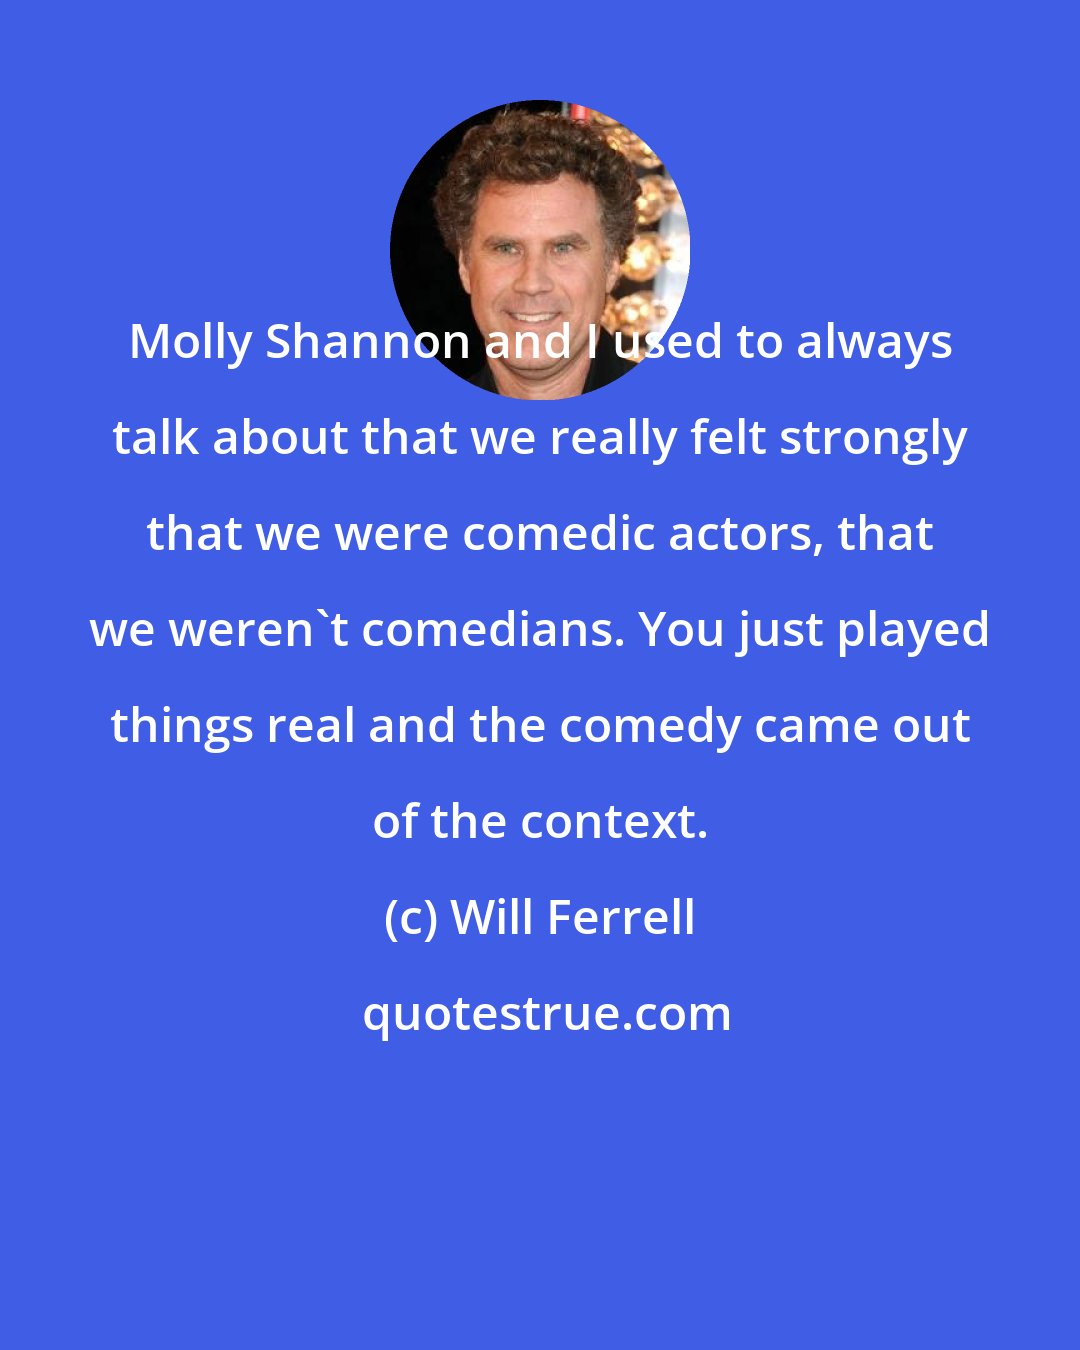 Will Ferrell: Molly Shannon and I used to always talk about that we really felt strongly that we were comedic actors, that we weren't comedians. You just played things real and the comedy came out of the context.